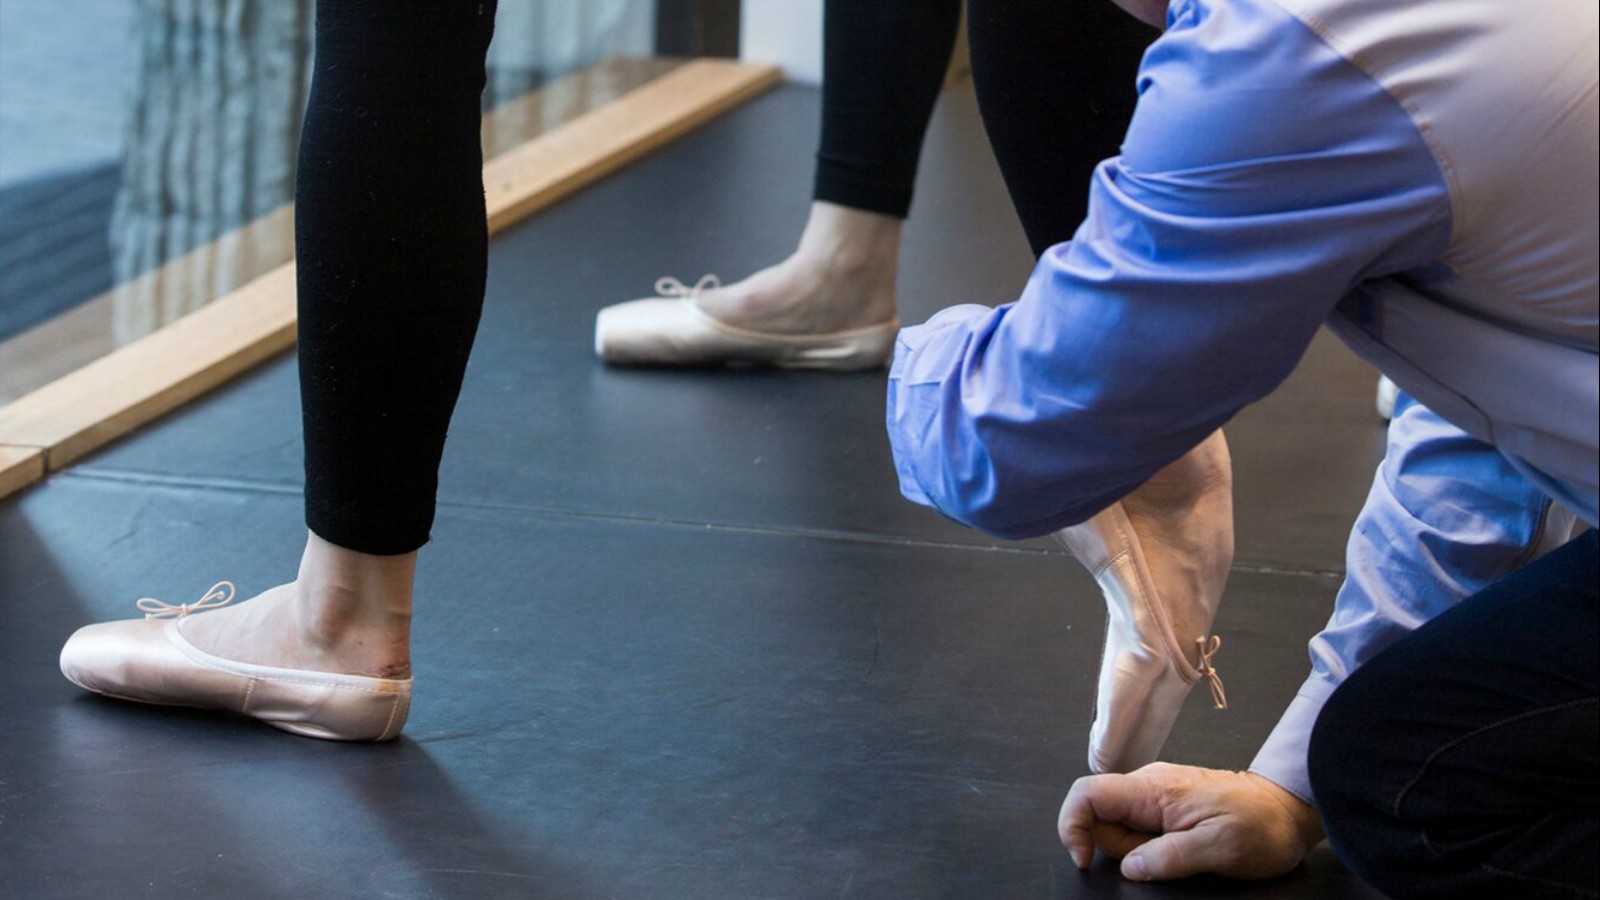 What To Expect At Your First Pointe Shoe Fitting - FitnessRetro